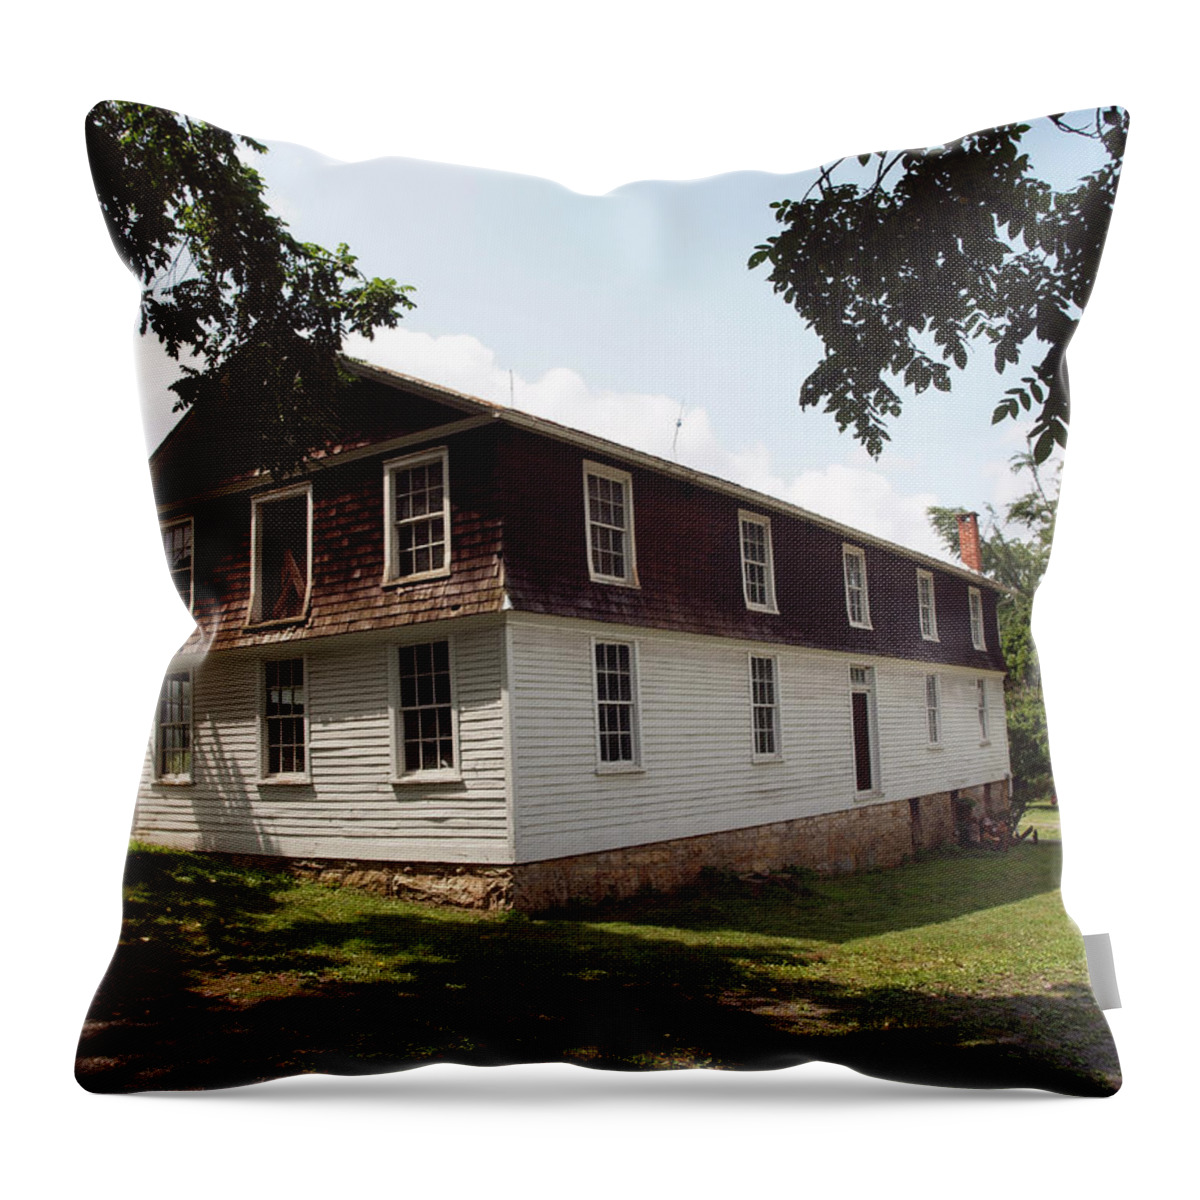 Cabins Throw Pillow featuring the photograph The Old Barn by Robert Margetts